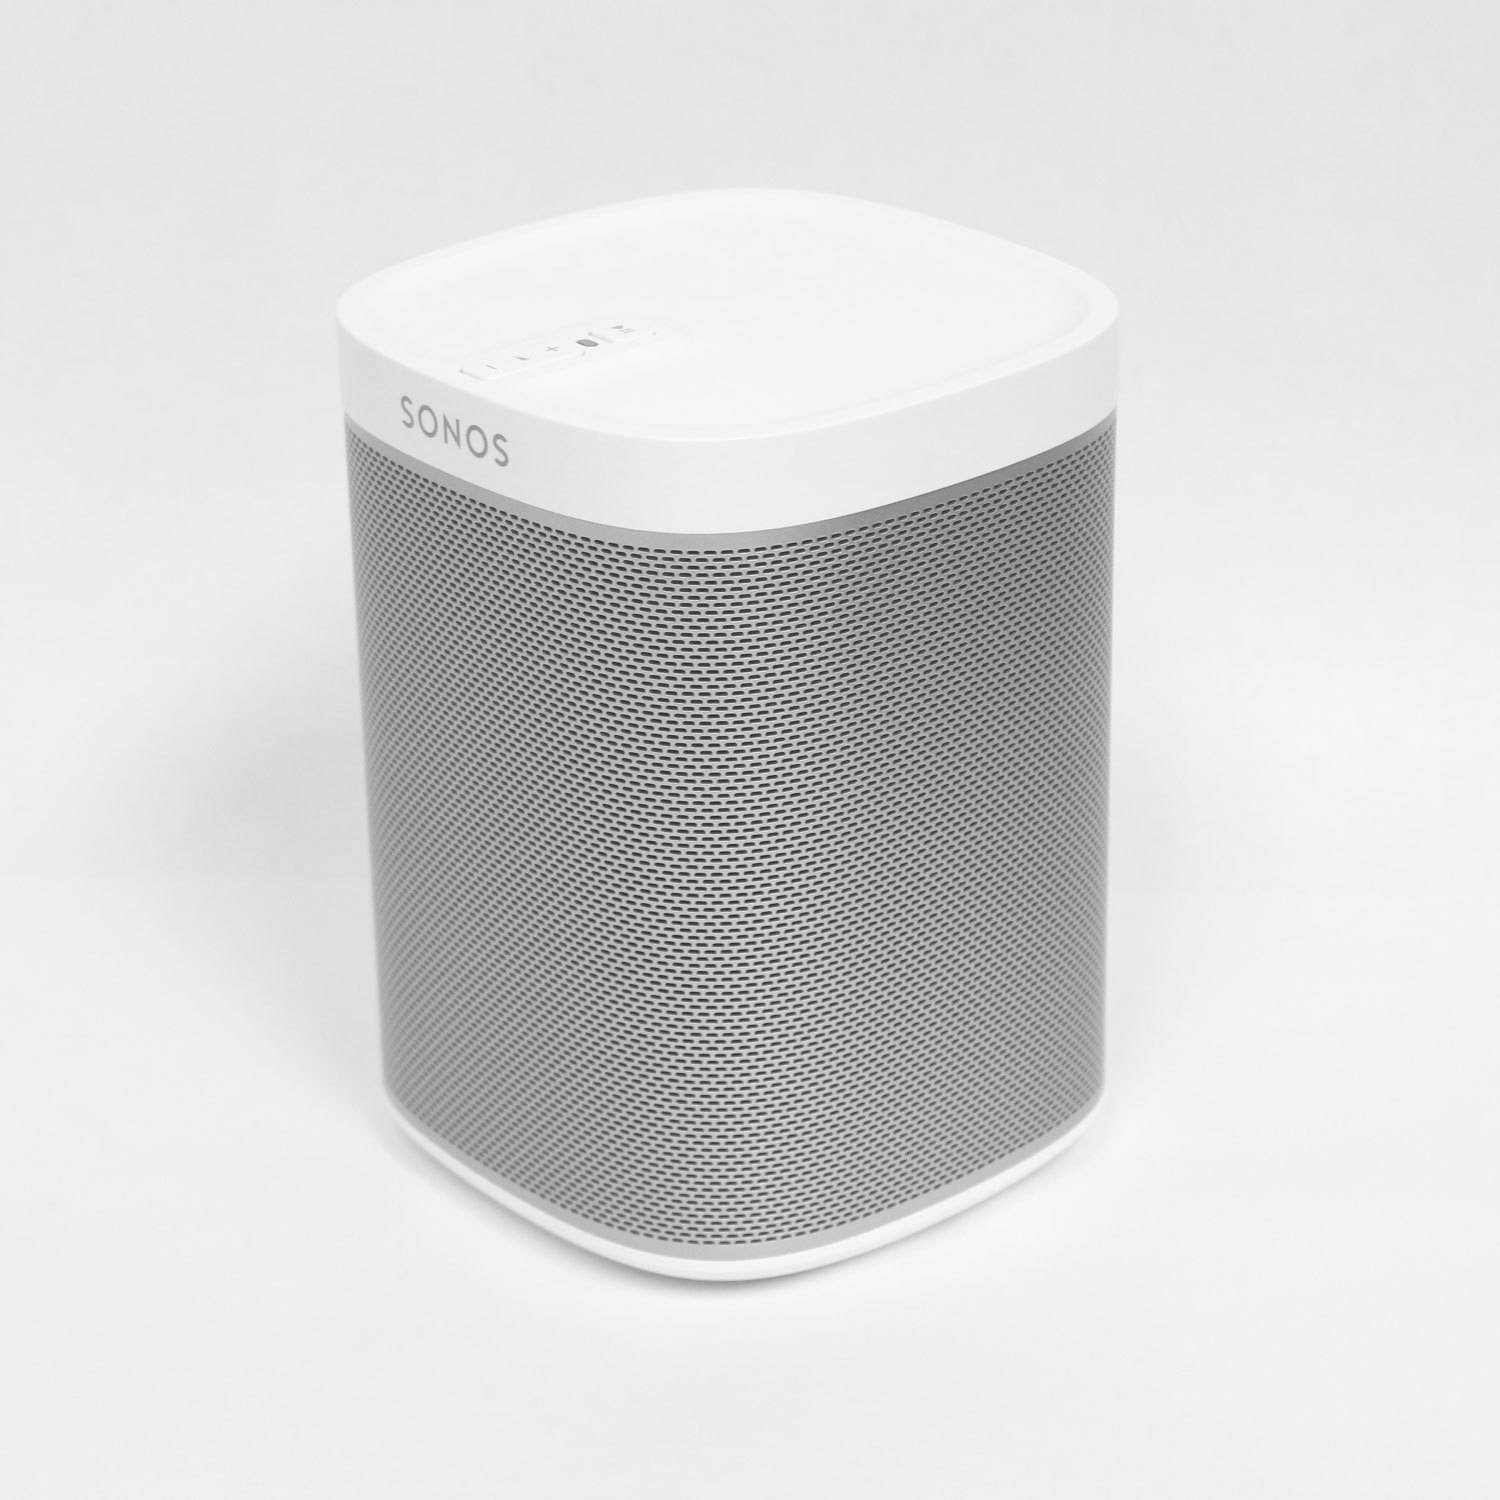 Sonos PLAY:1 Compact Smart Speaker for Streaming Music, White - image 2 of 5